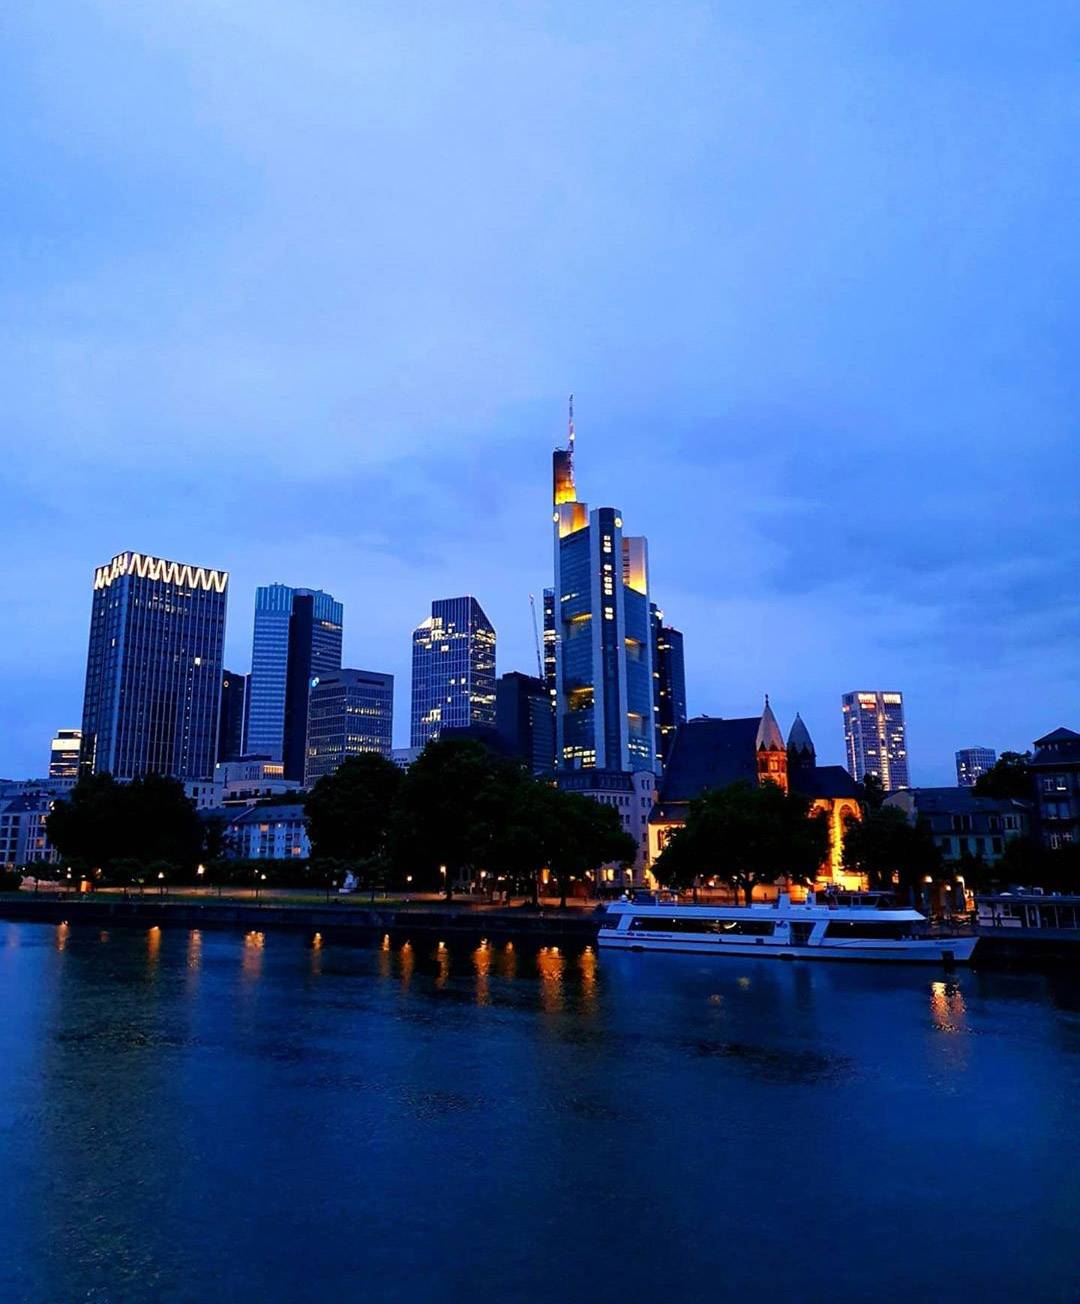 The end of a sunset in Frankfurt